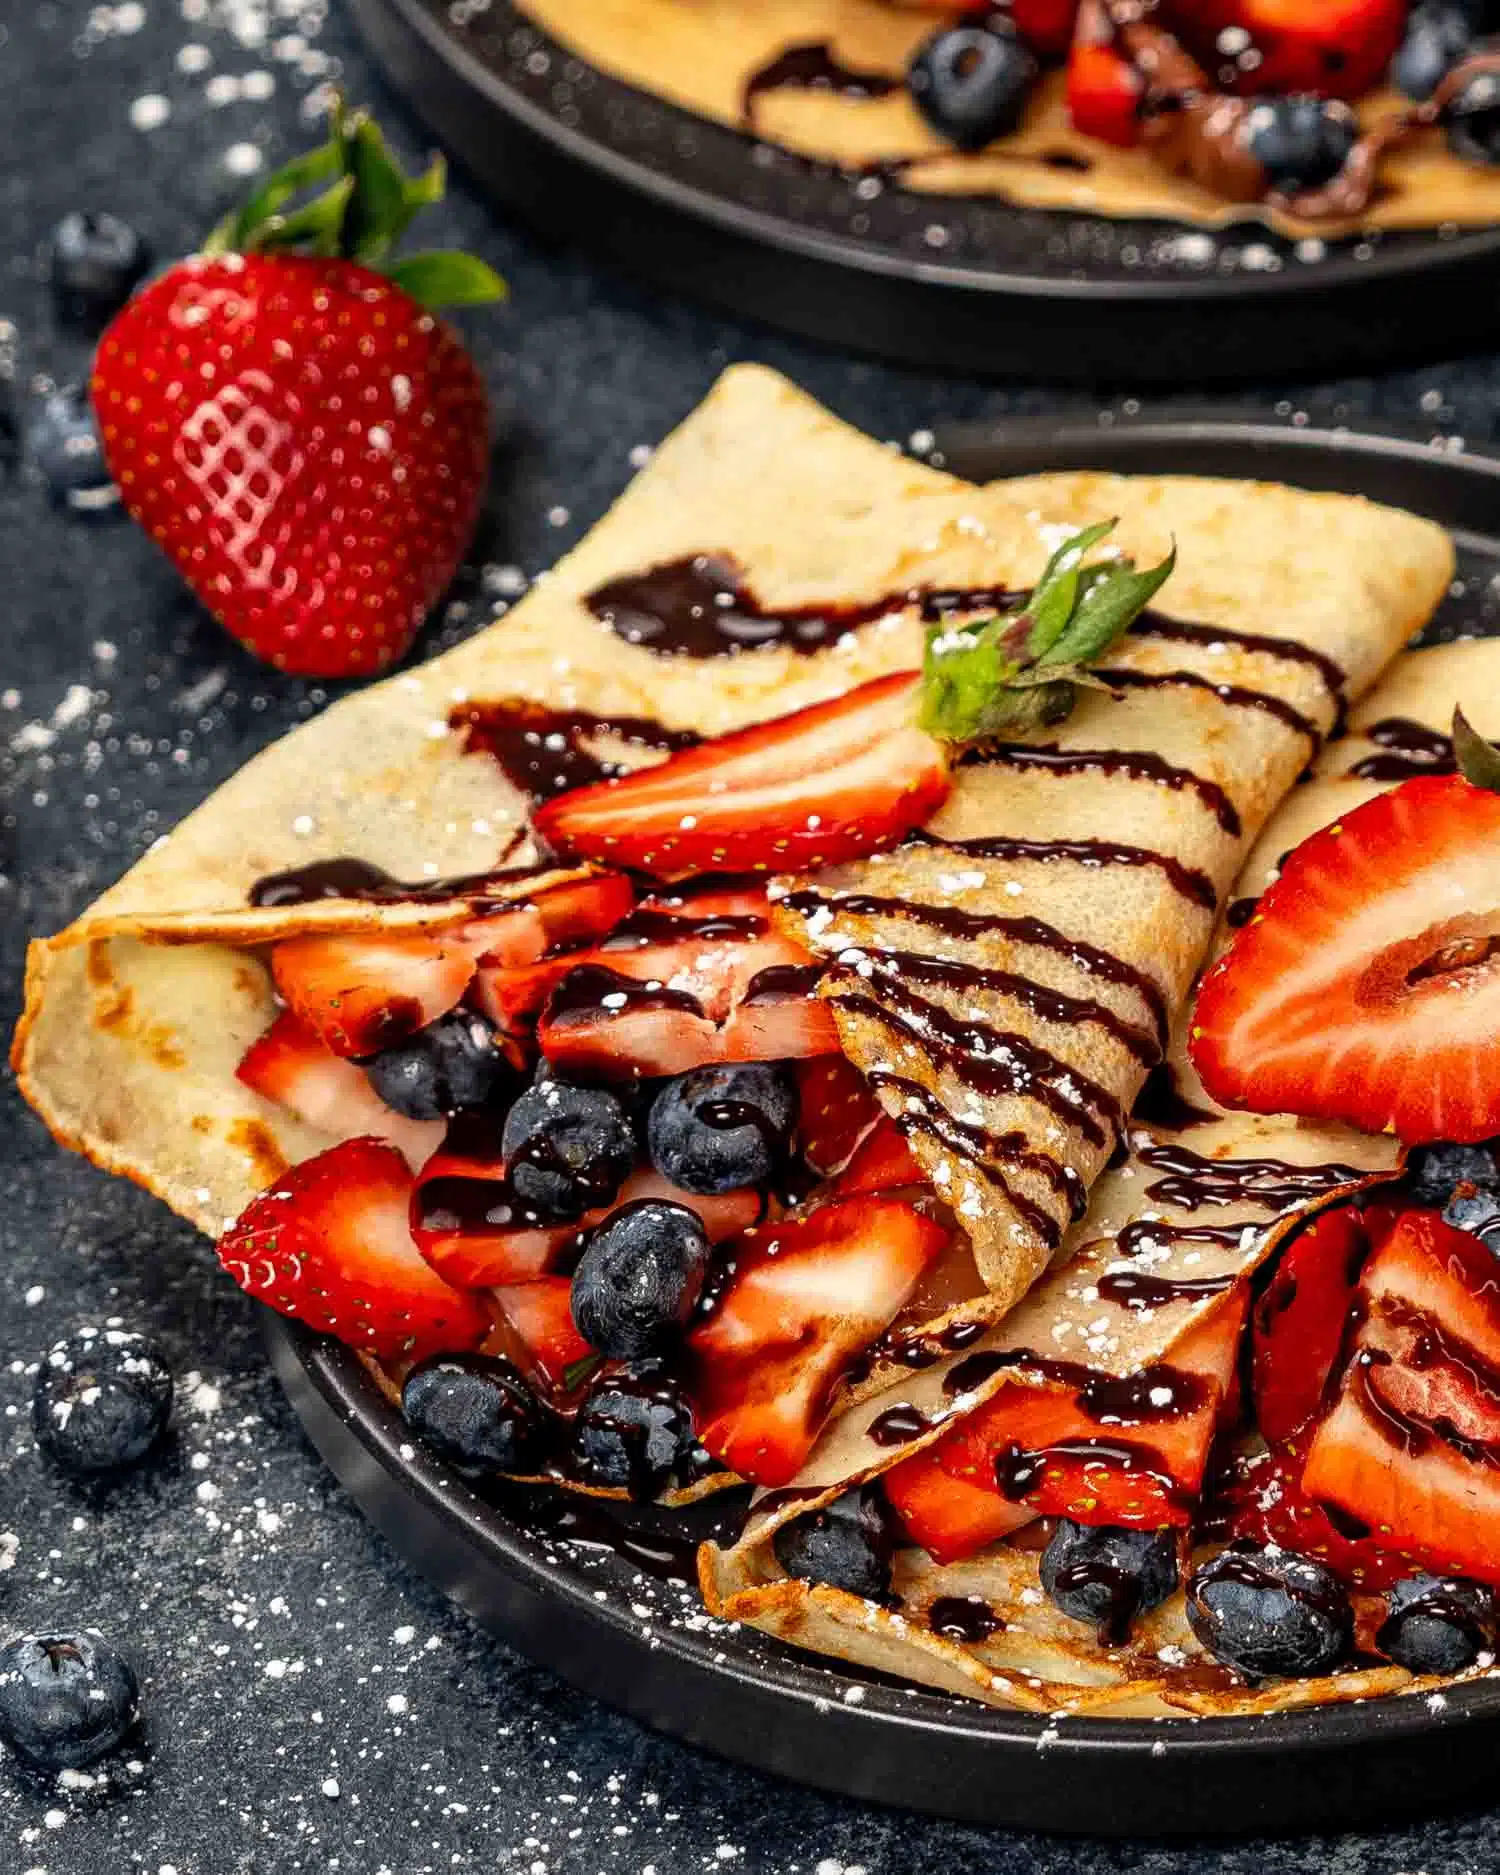 two crepes stuffed with nutella and berries on a black plate.